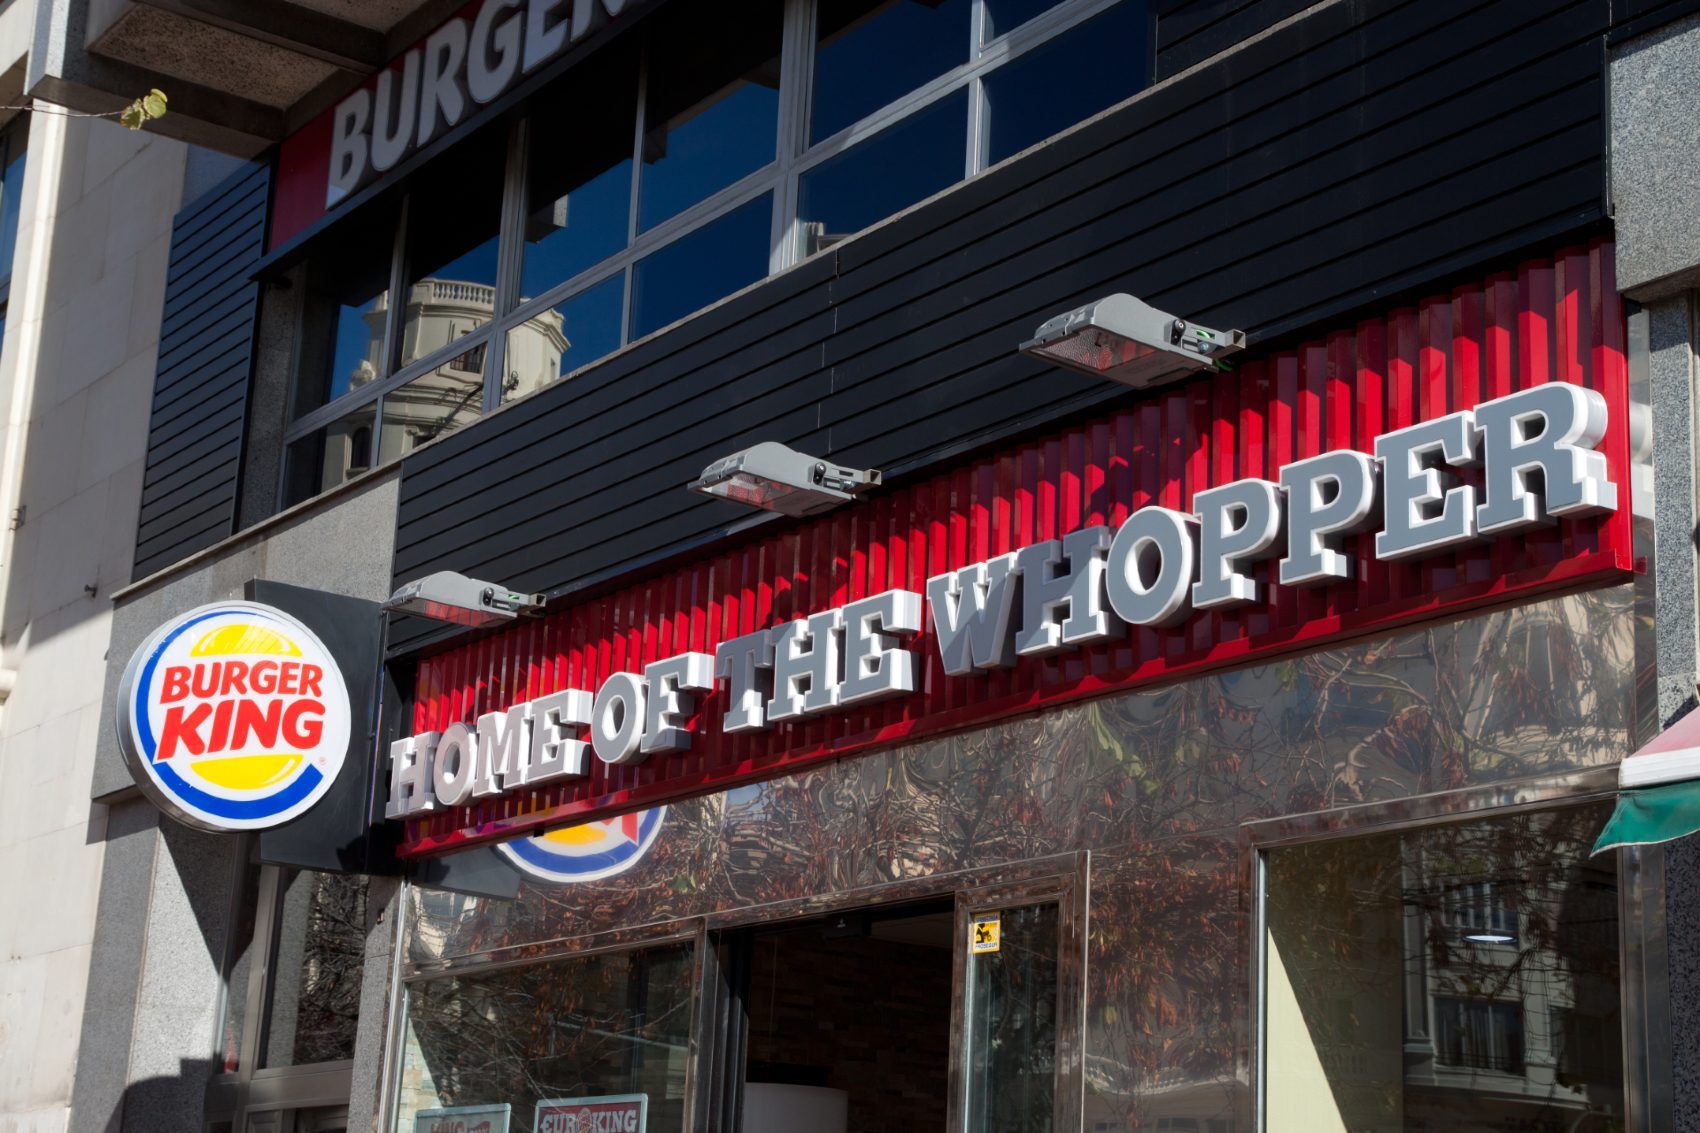 Burger King storefront reads "Home of the Whopper" - Burger King Impossible Whopper